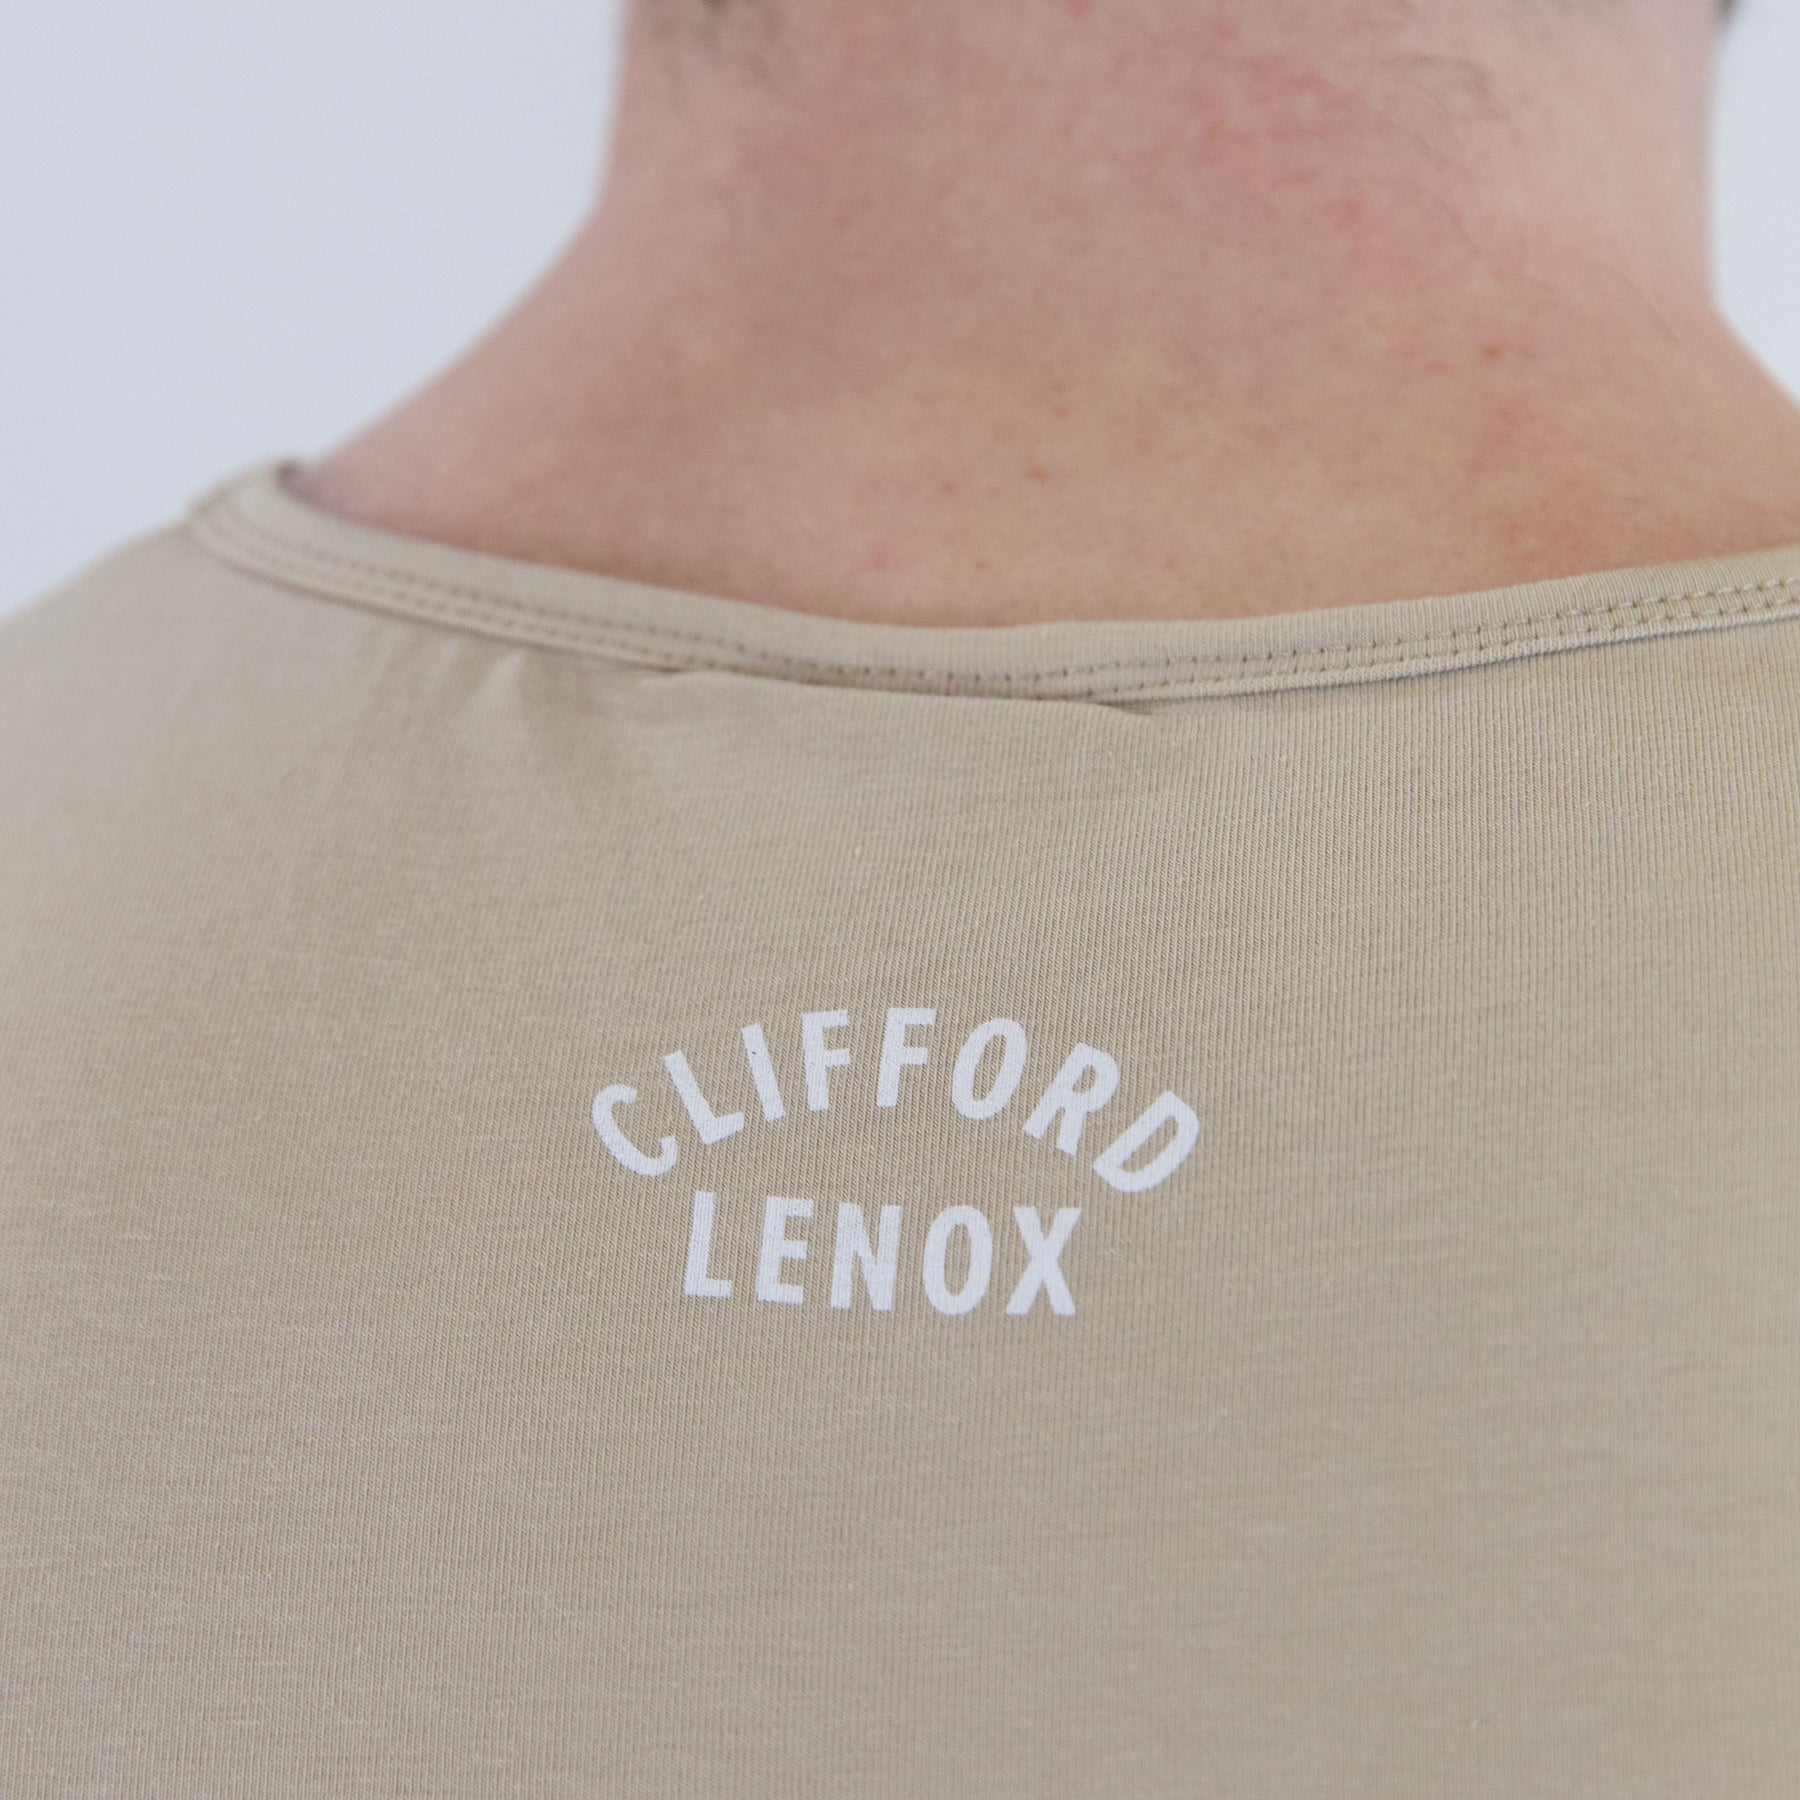 Men's Workout Gear: Top Choices for Fitness Enthusiasts – Clifford Lenox